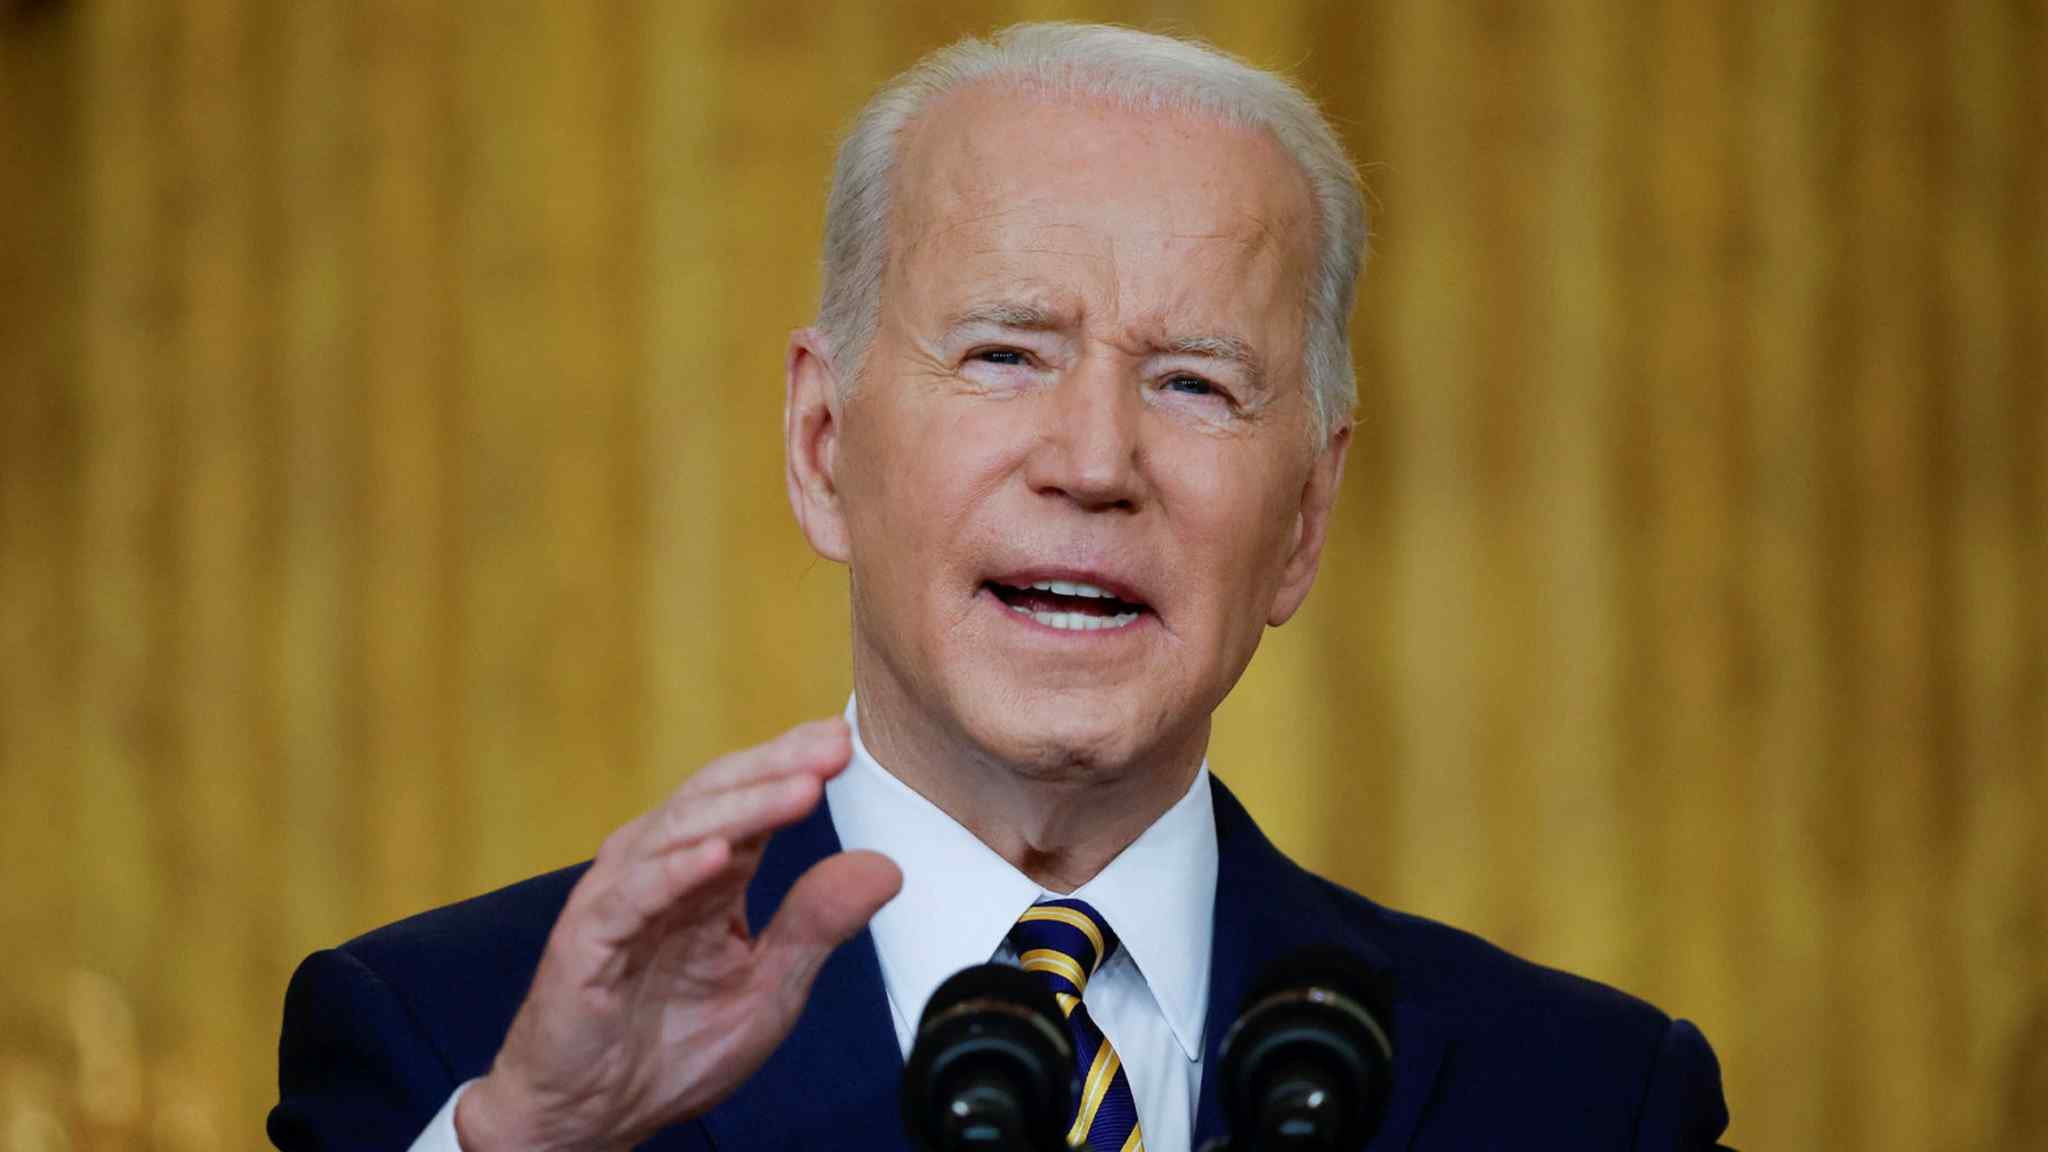 Biden backs Fed’s shift to monetary tightening to curb inflation